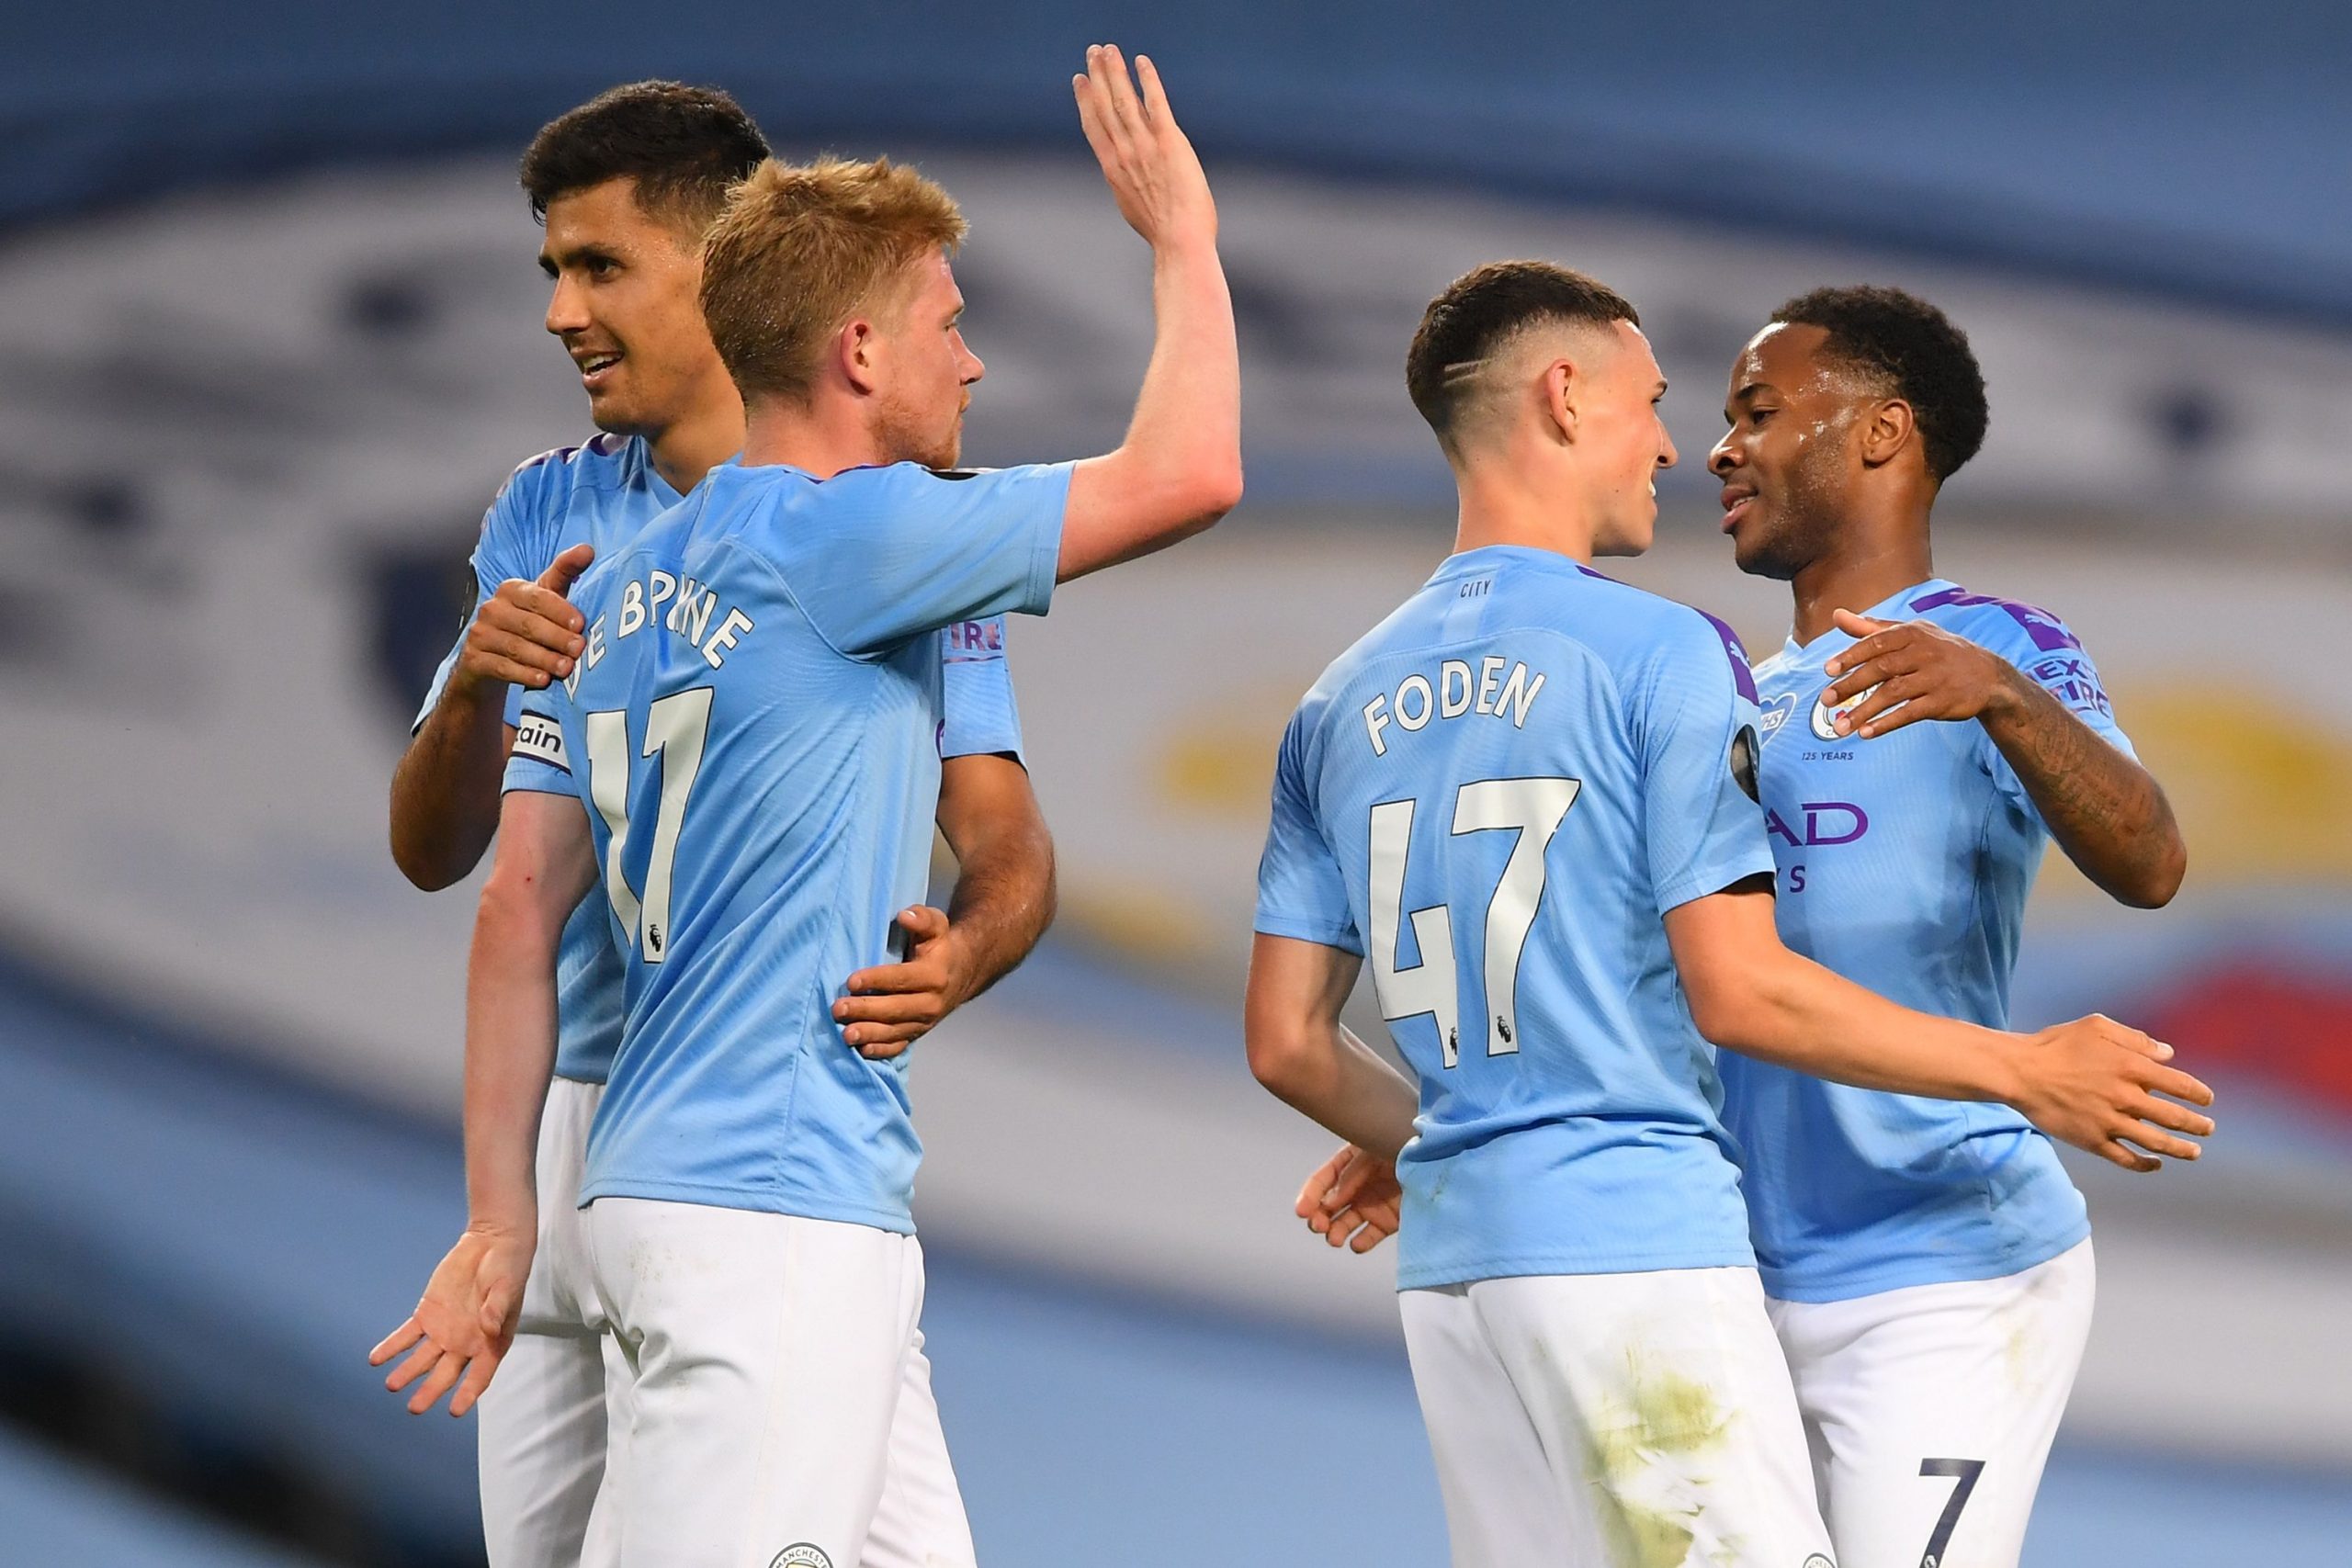 Manchester City player ratings vs Liverpool (Man City players celebrating in the picture)